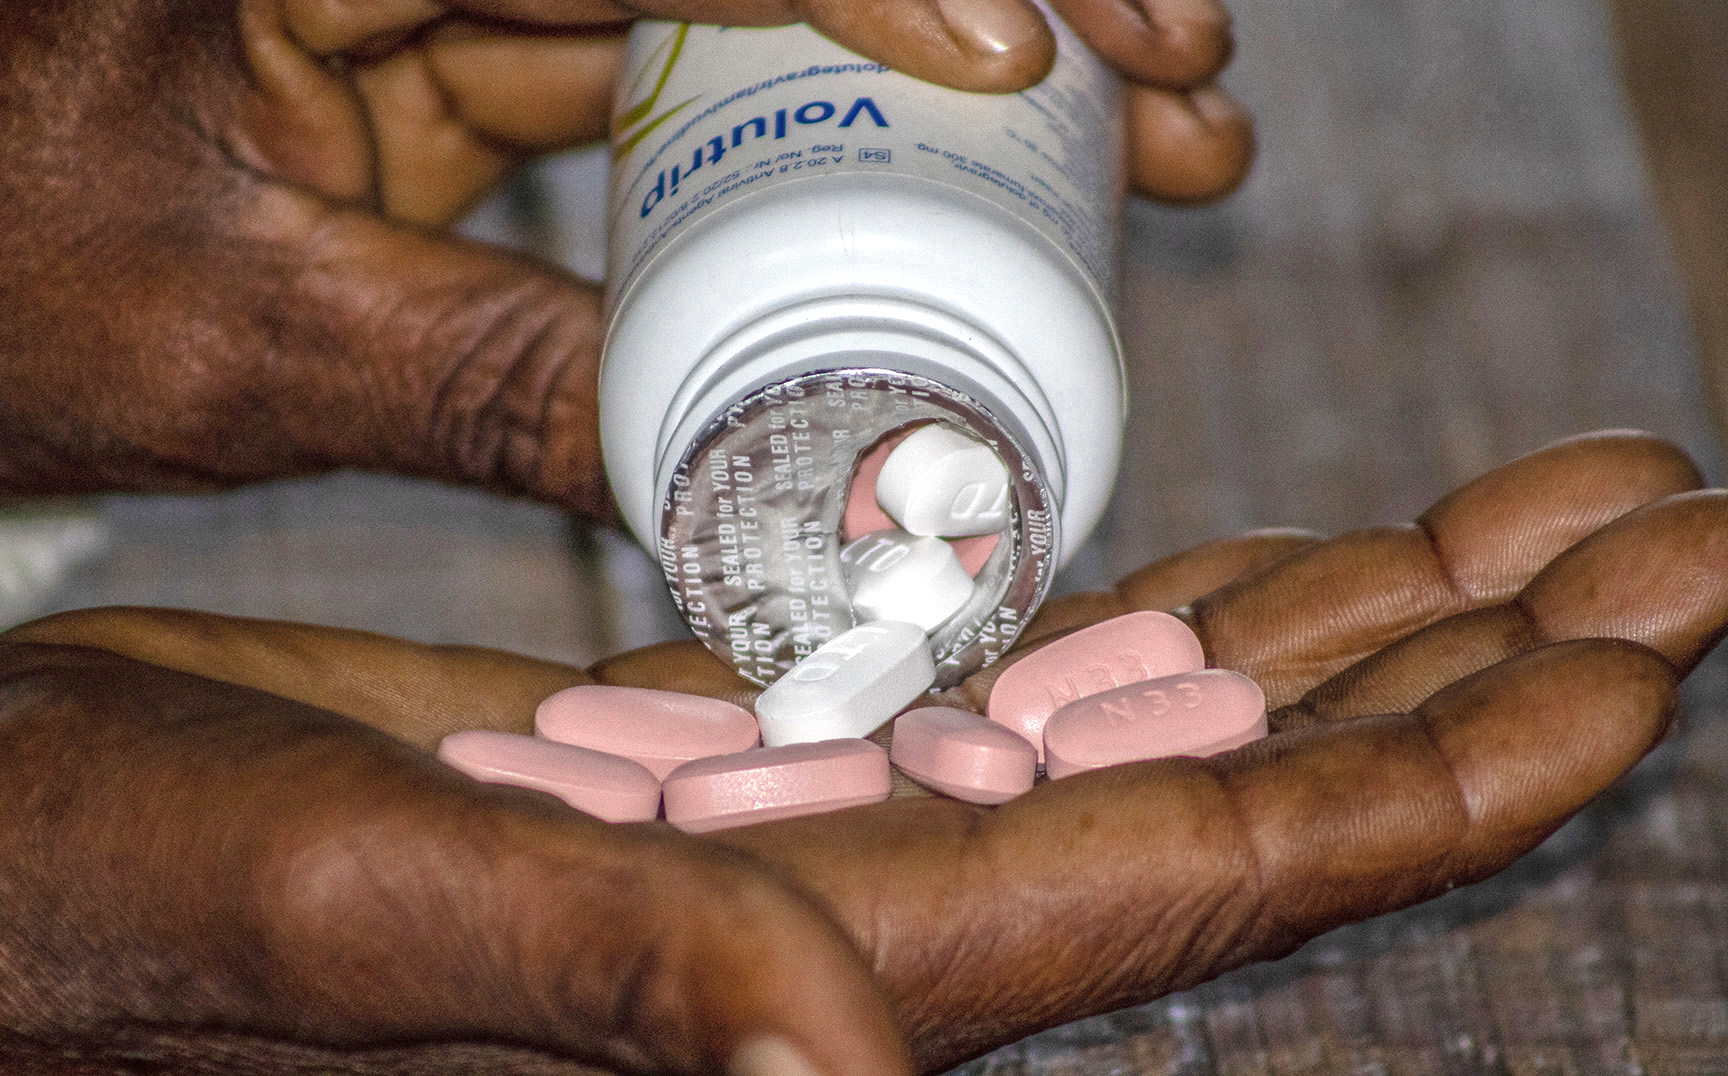 HIV treatment and medication